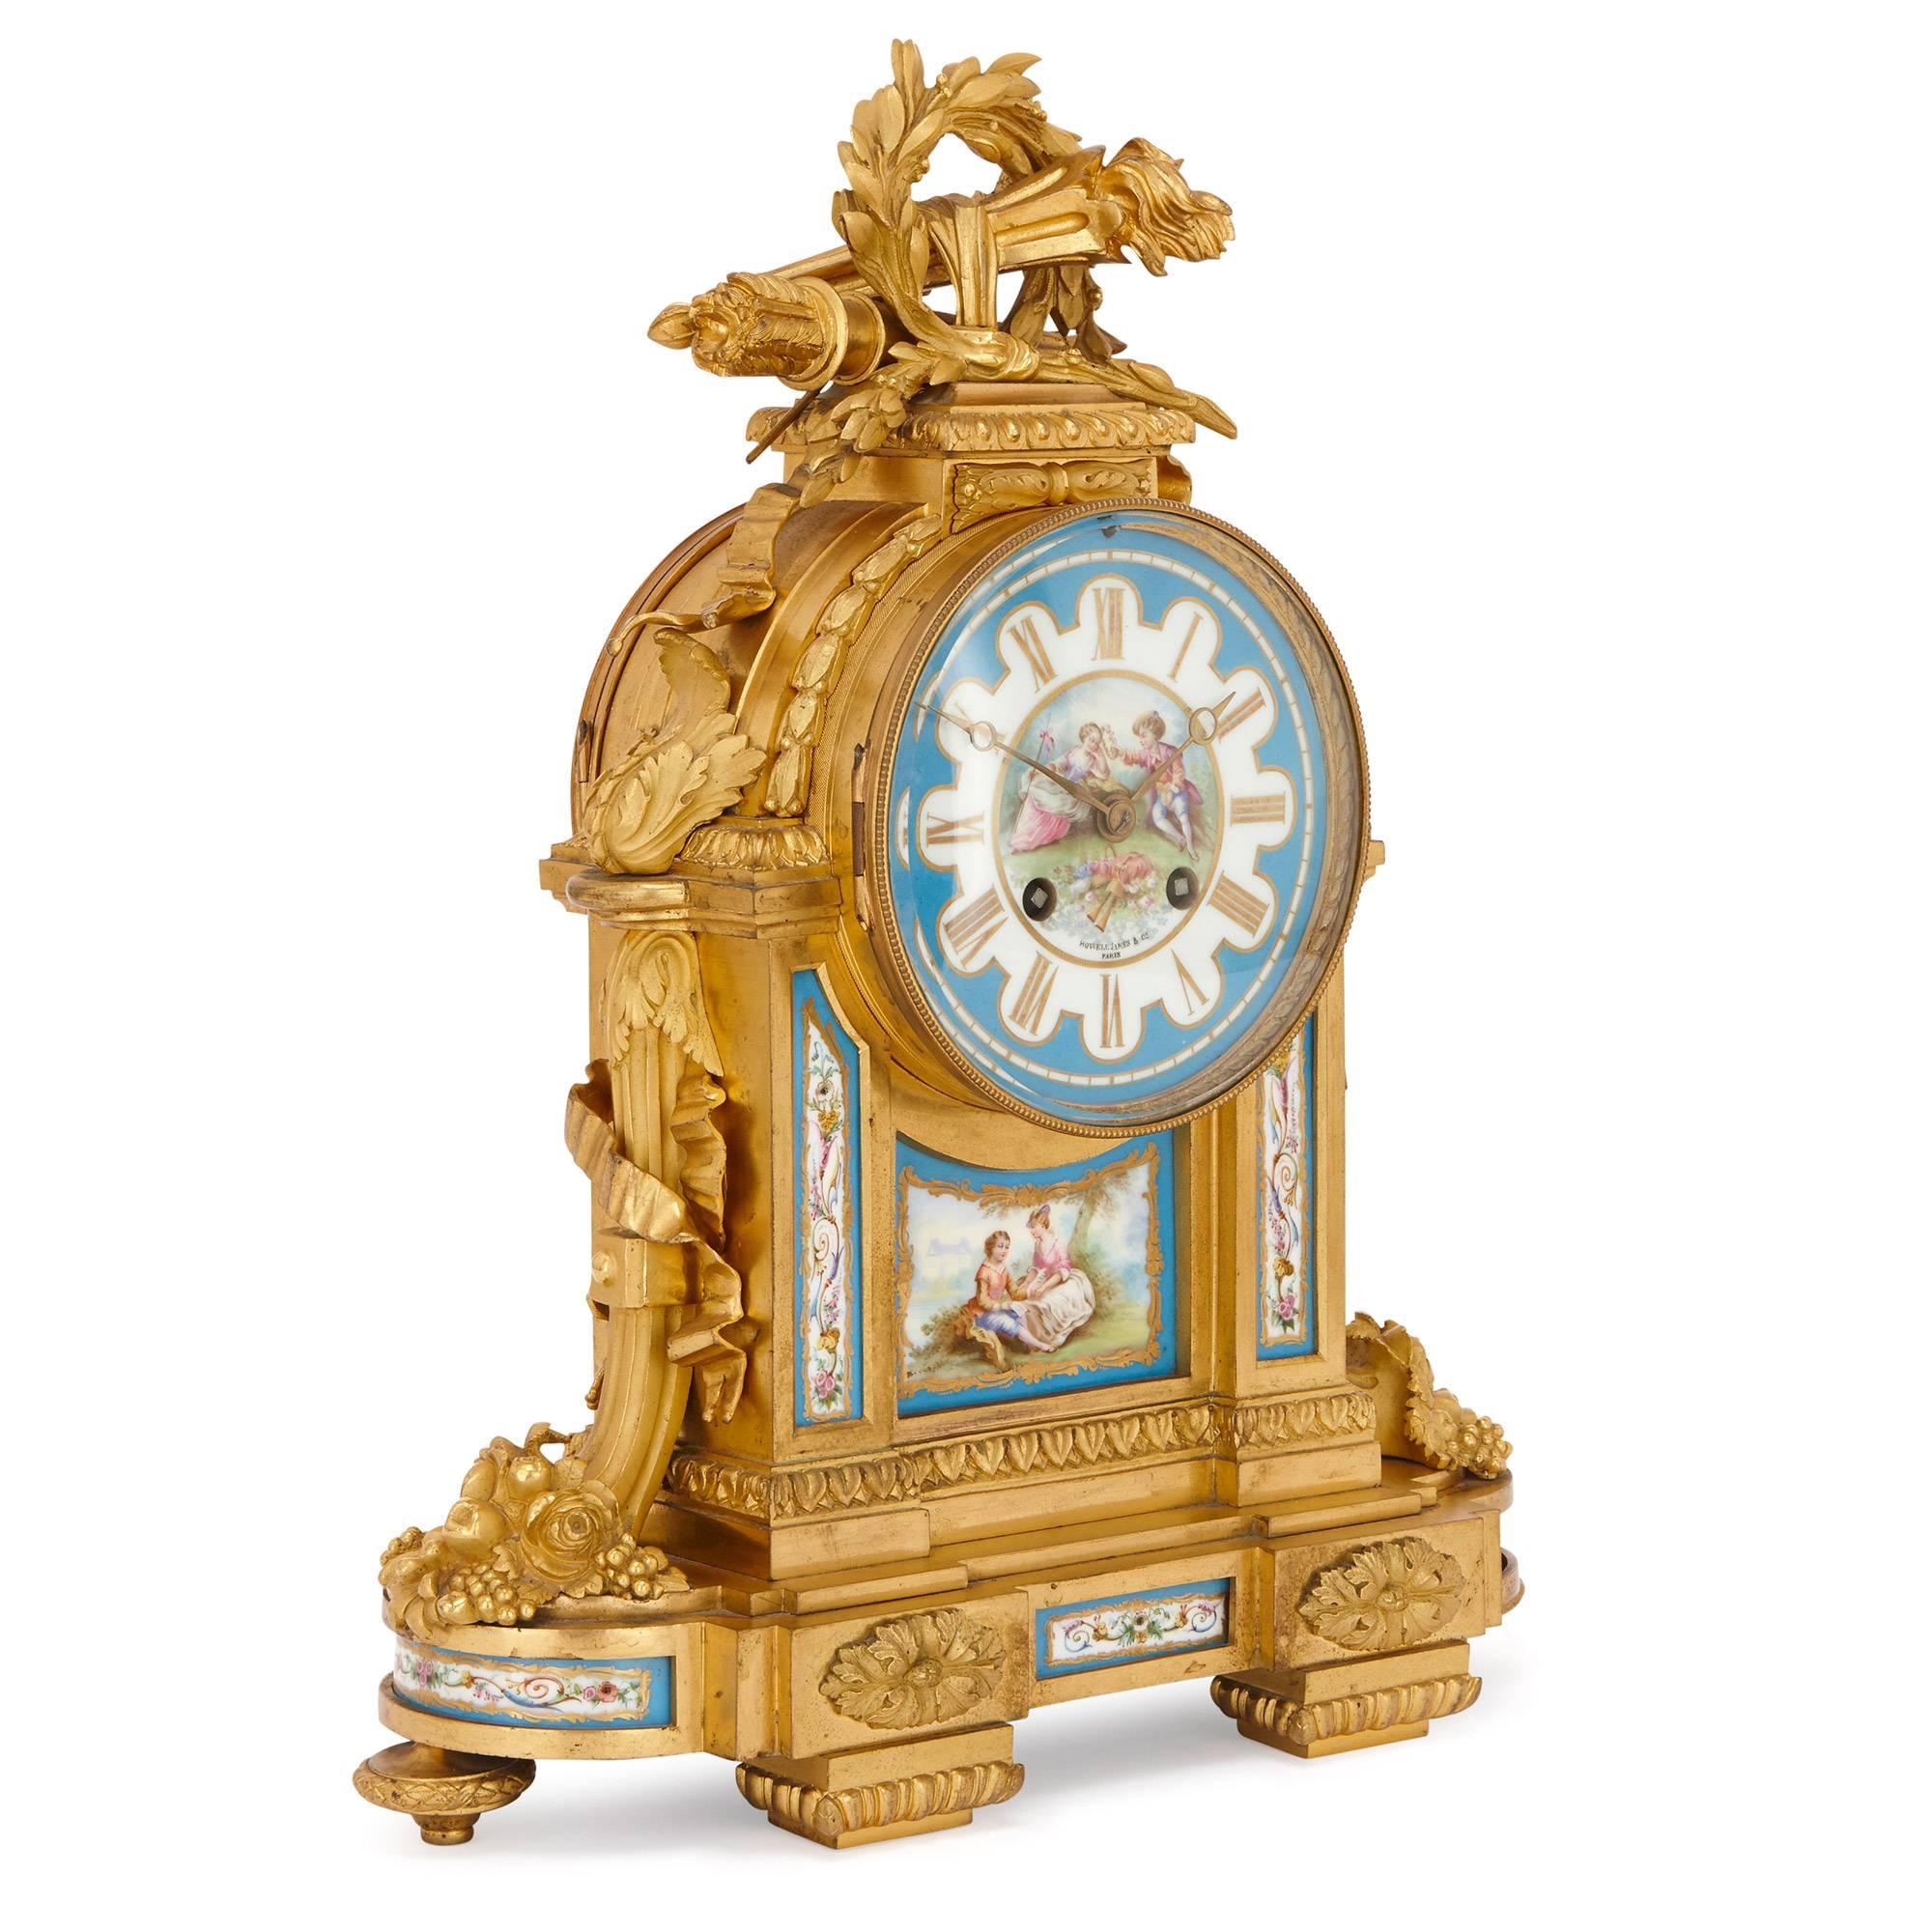 The combination of sumptuous, lustrous ormolu and finely decorated Sevres style porcelain makes this mantel clock an exceptional piece. Built in France and retailed by the prestigious London-based jewellery firm Howell James & Co in the 19th